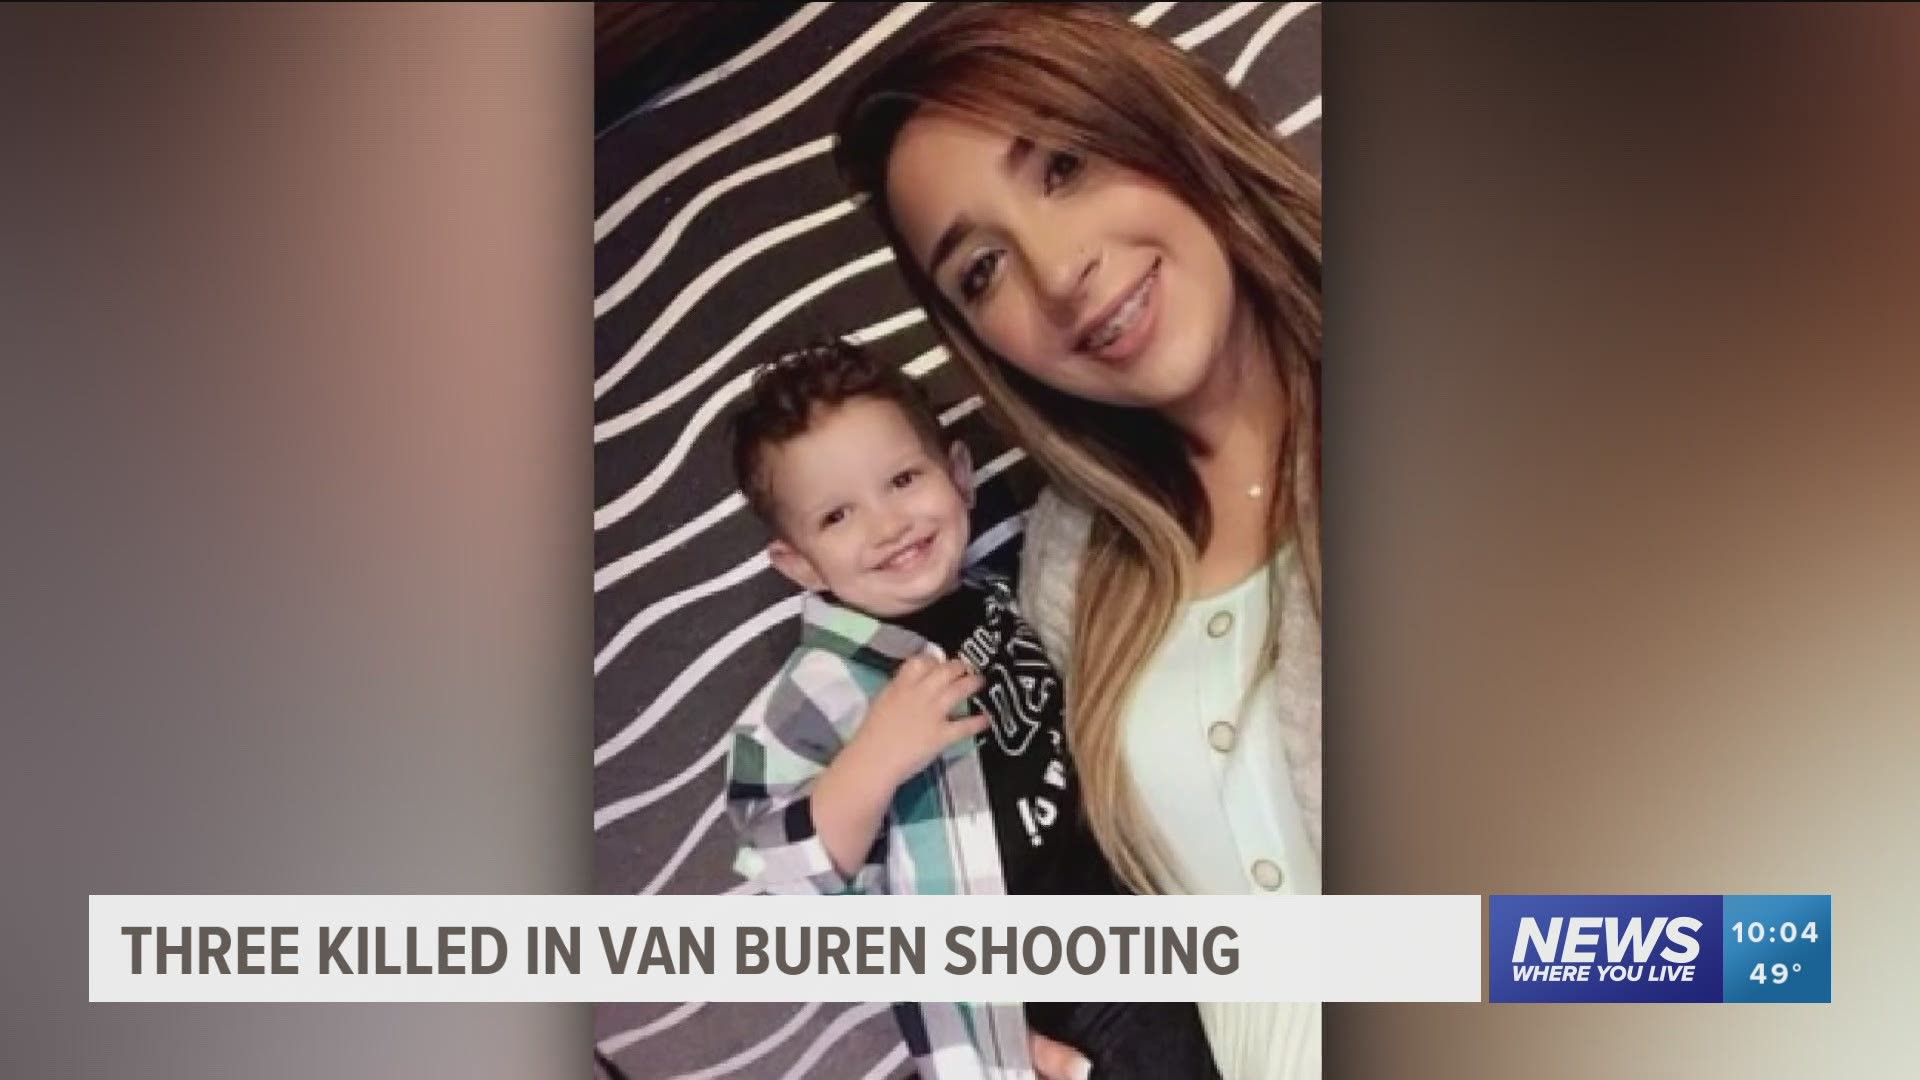 A suspected murder-suicide claimed the life of a young mother and son in Van Buren. https://bit.ly/2P7MIVU